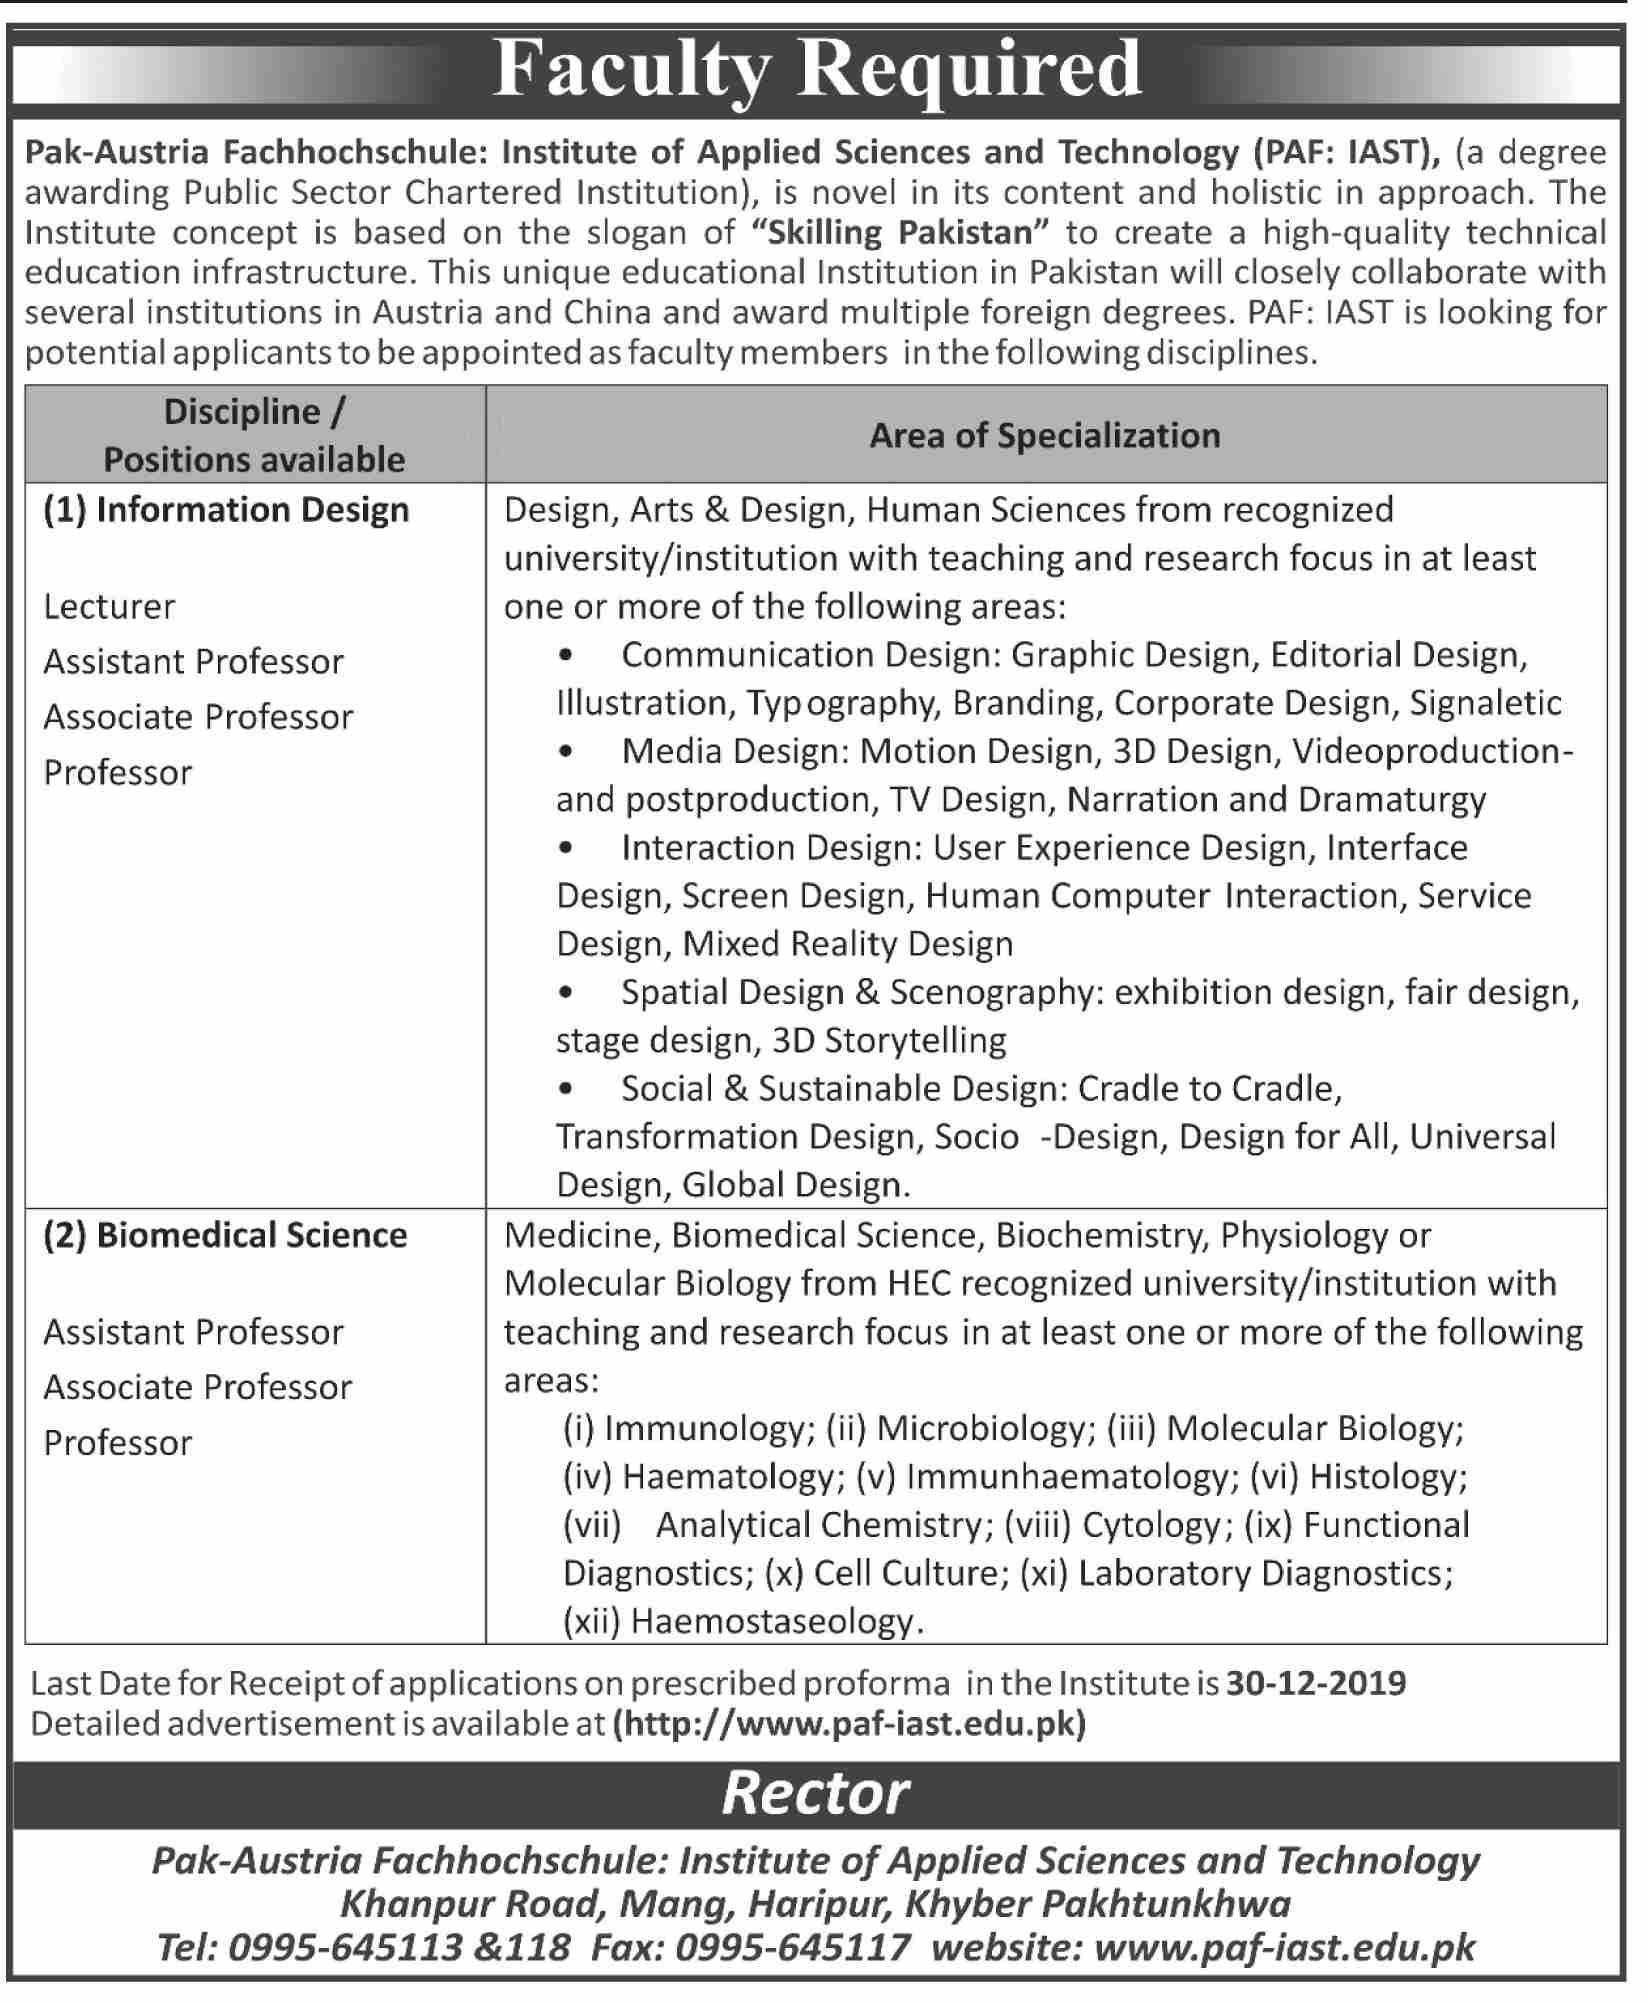 Jobs In Pak-Austria Fachhochschule Institute of Applied Sciences and Technology 05 December 2019